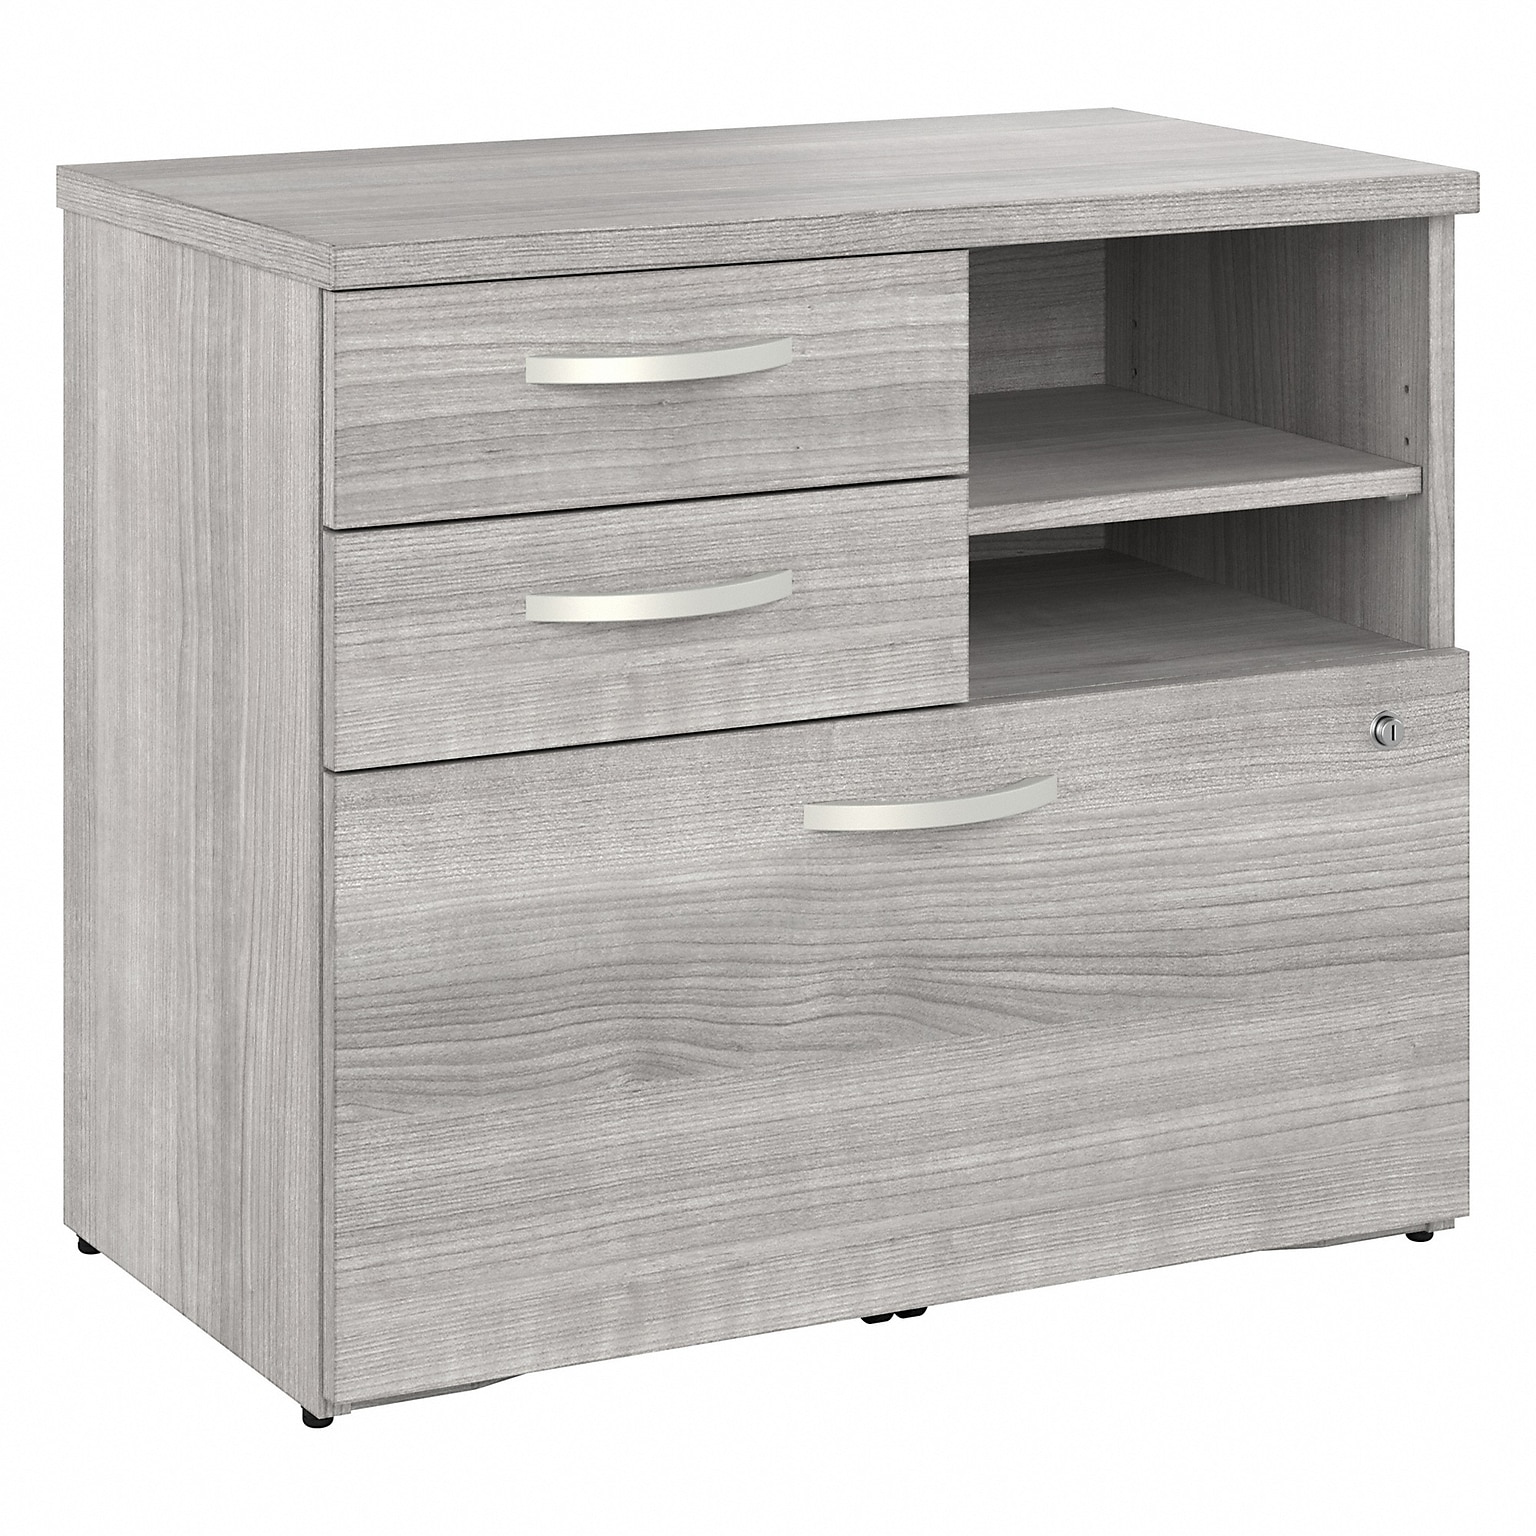 Bush Business Furniture Studio A 26 Office Storage Cabinet with 2 Shelves and Drawers, Platinum Gray (SDF130PGSU-Z)